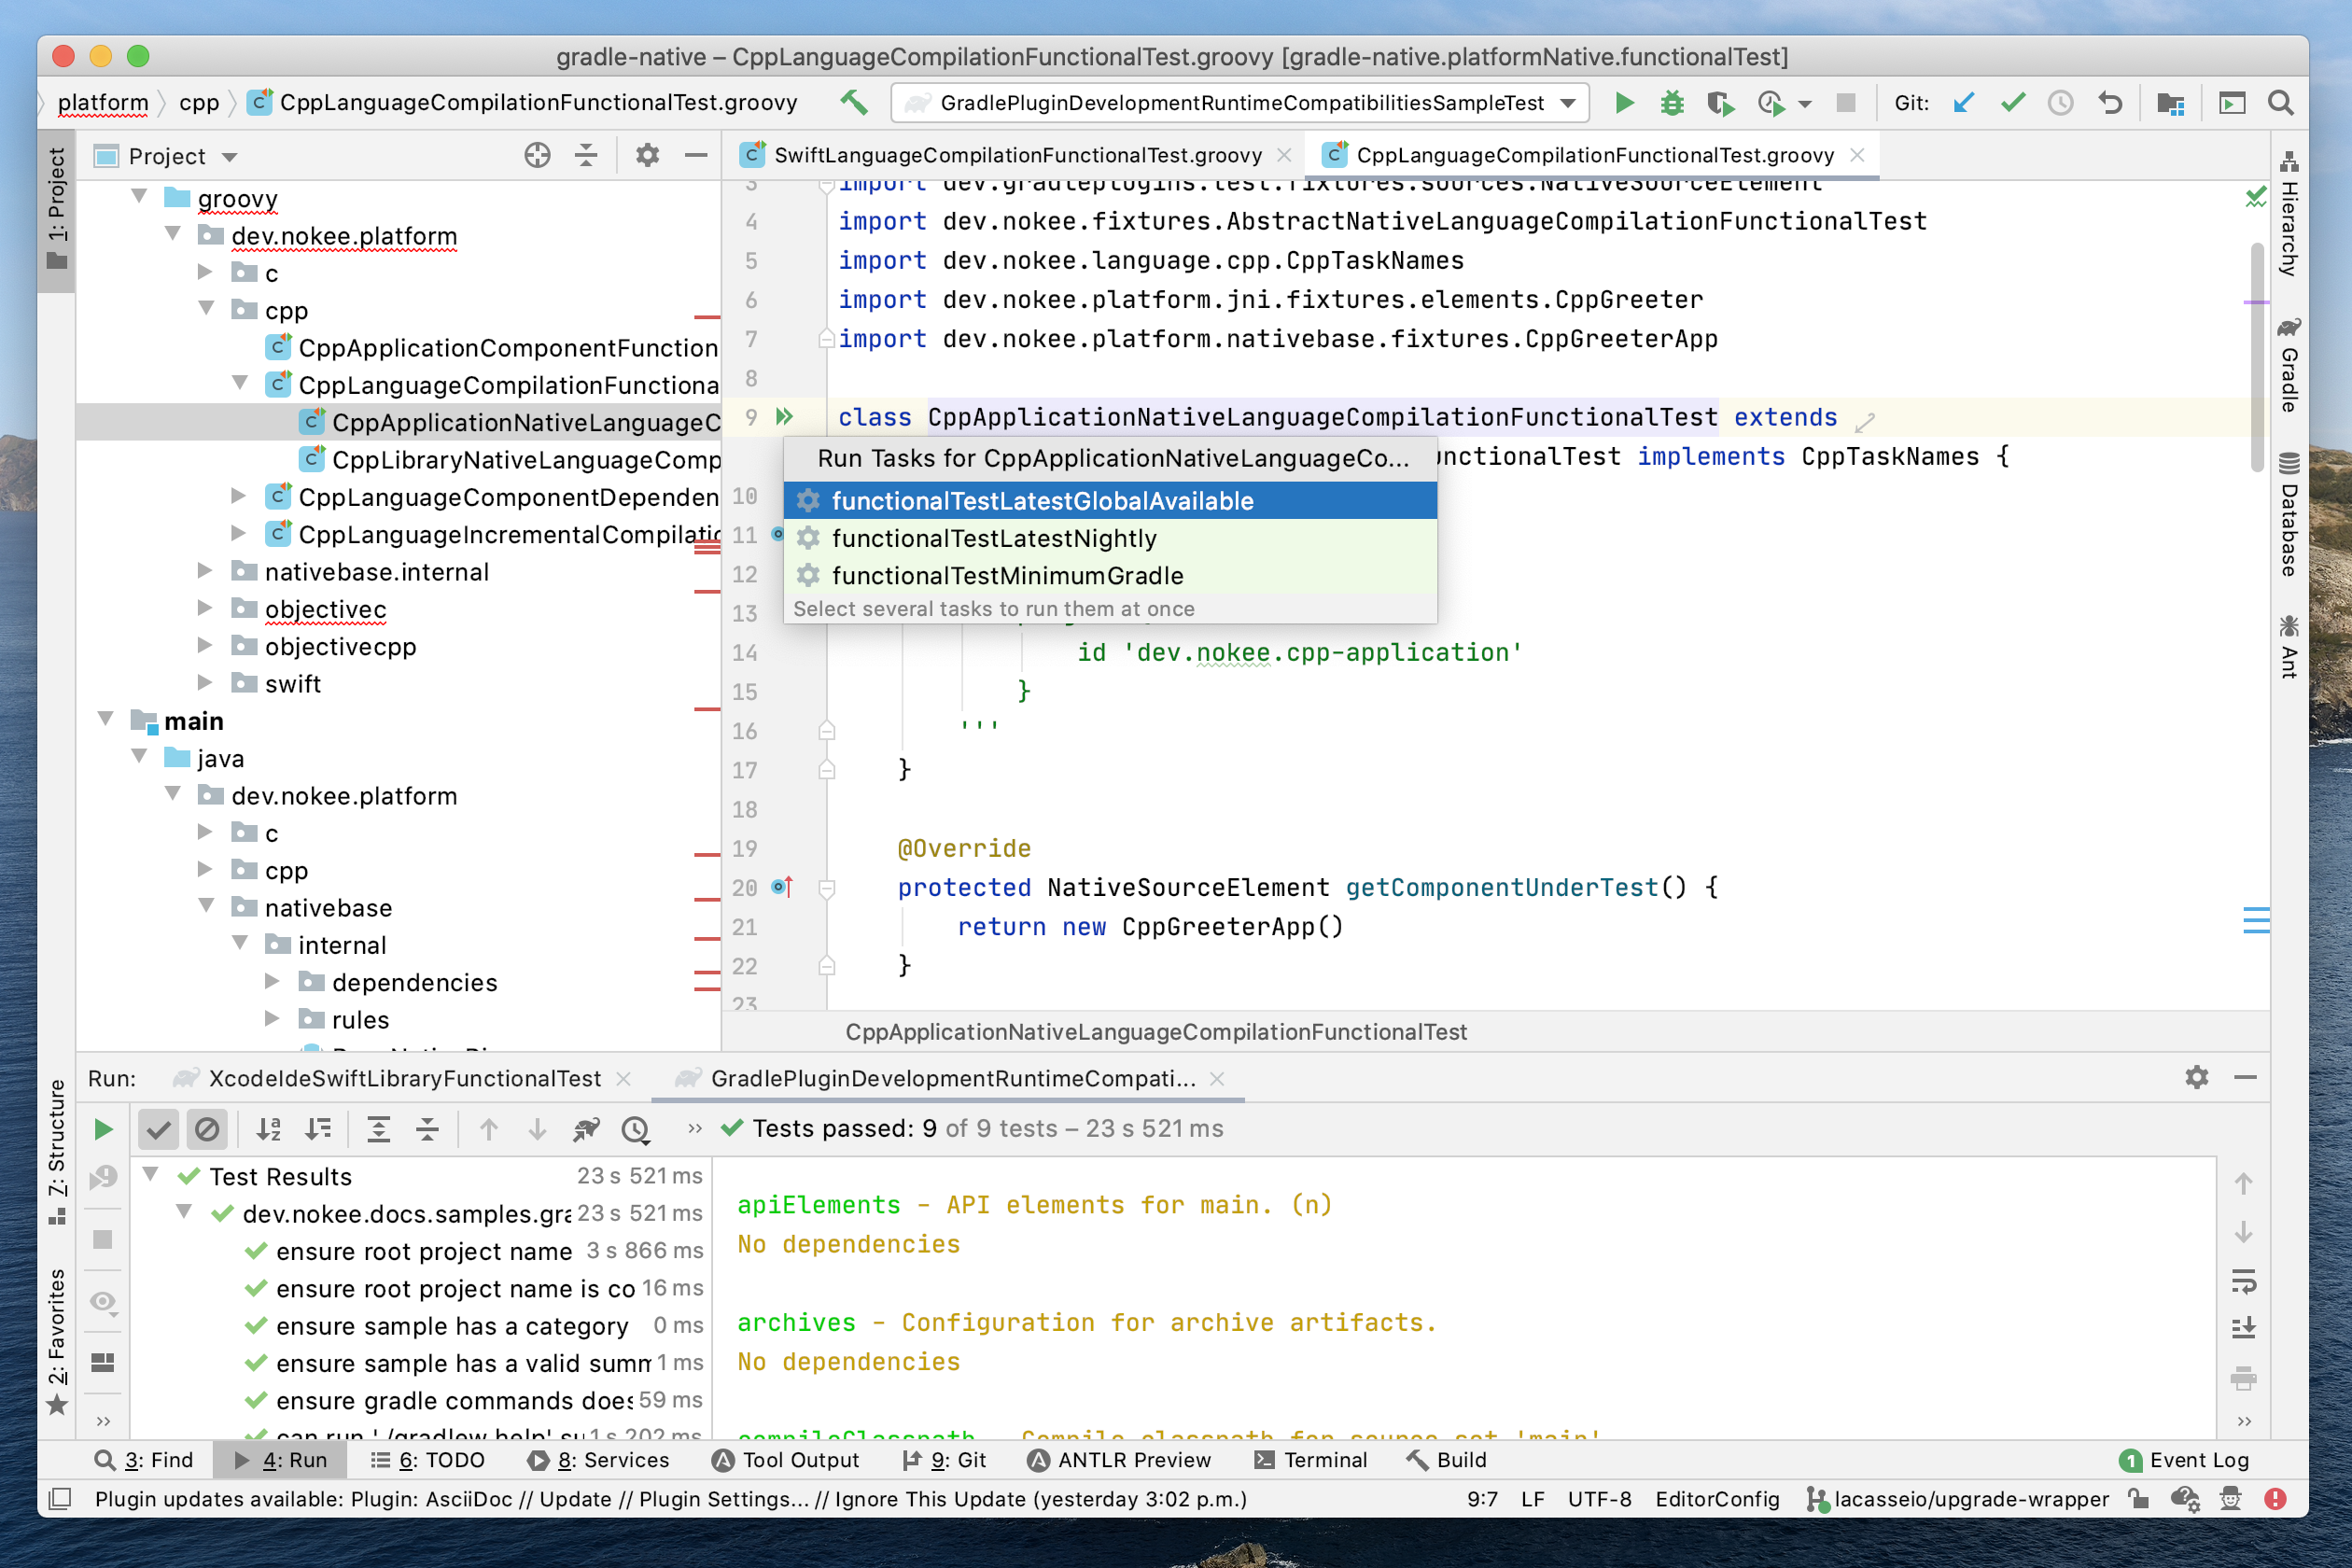 Developer experience from IDE for testing strategies.